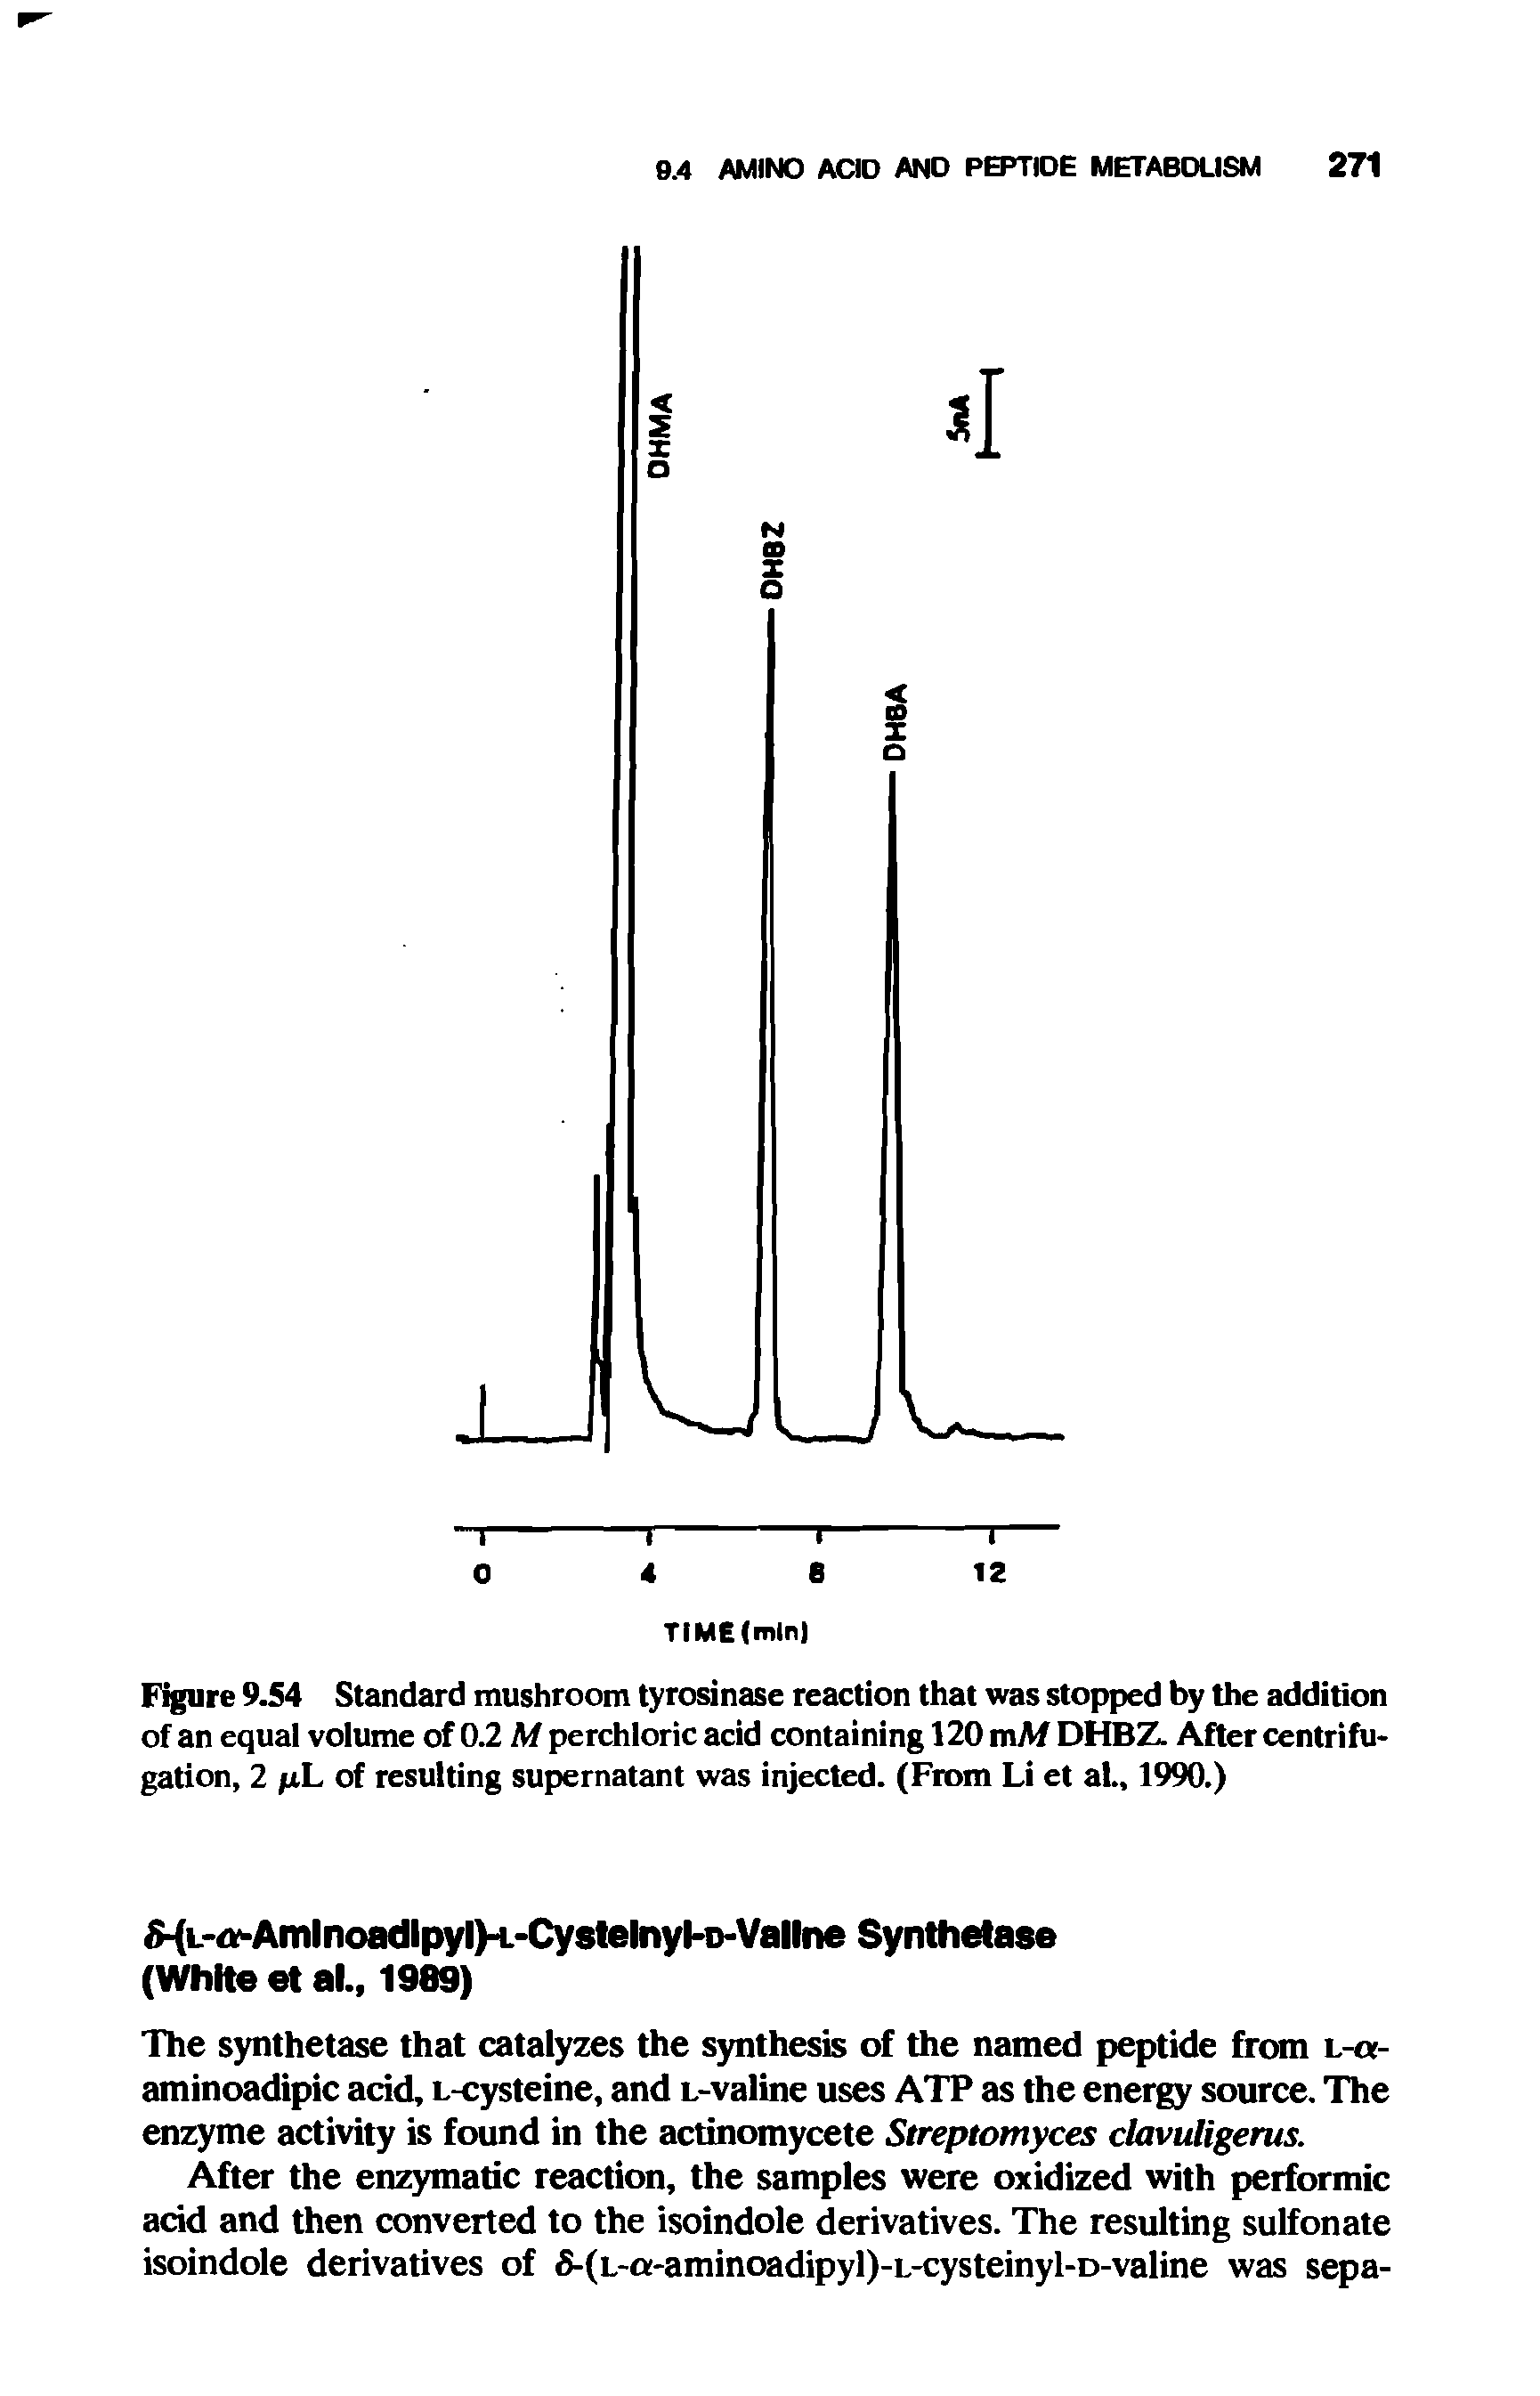 Figure 9.54 Standard mushroom tyrosinase reaction that was stopped by the addition of an equal volume of 0.2 M perchloric acid containing 120 mAf DHBZ. After centrifugation, 2 fiL of resulting supernatant was injected. (From Li et at., 1990.)...